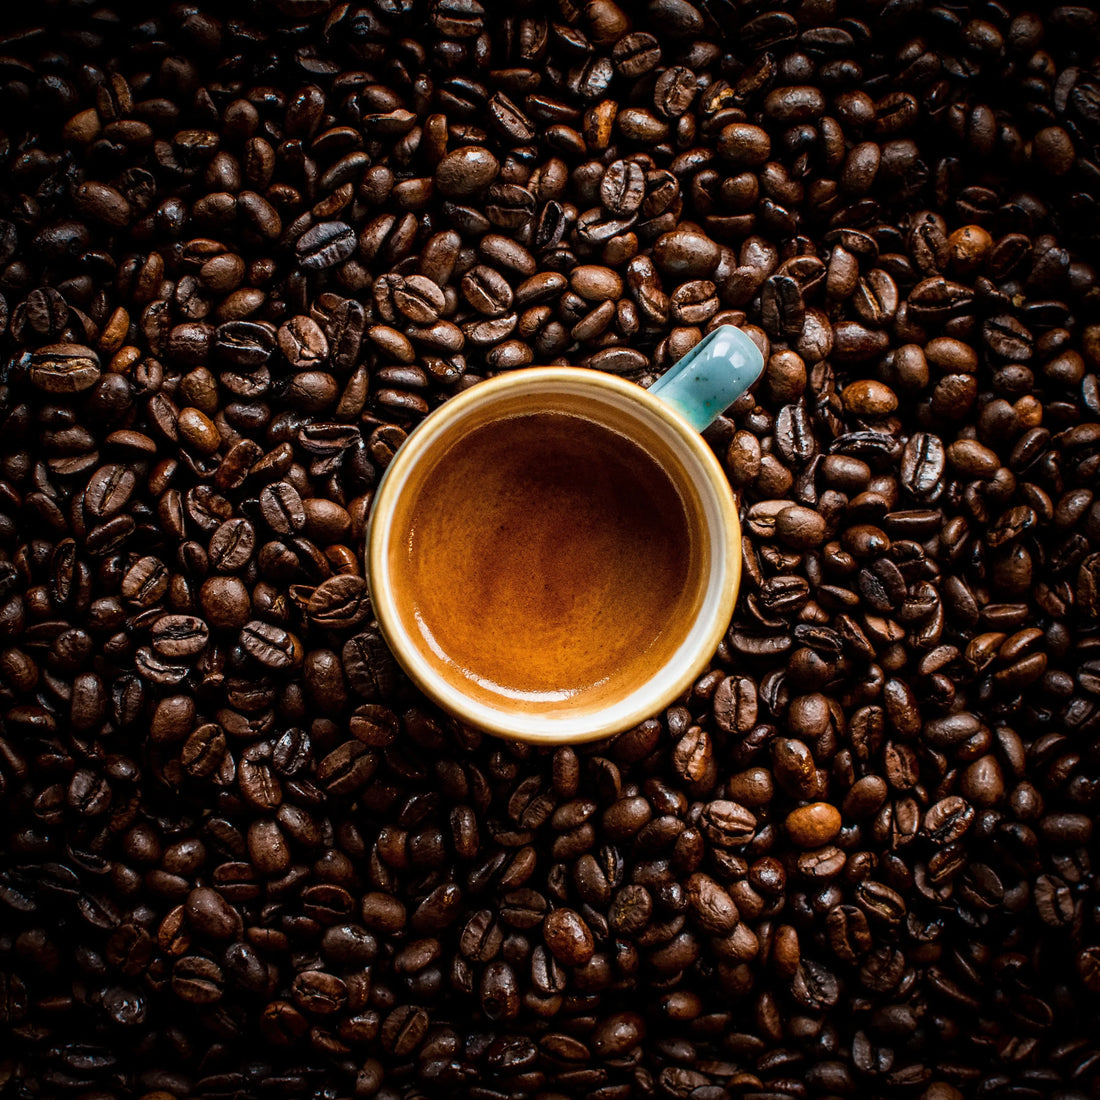 Coffee vs Espresso: What’s the Difference?